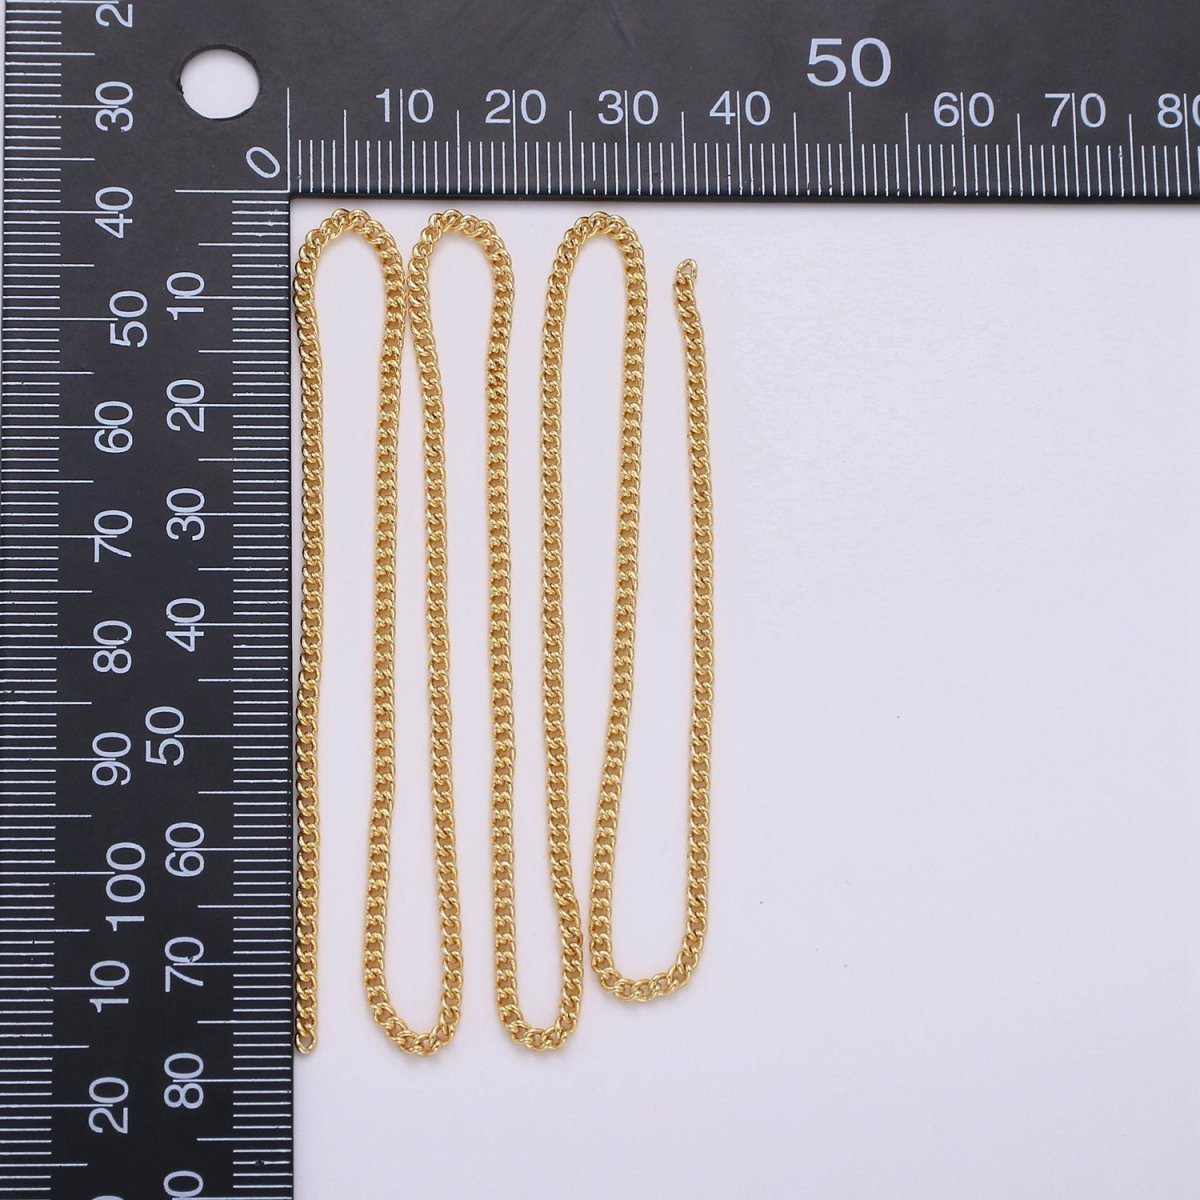 24K Gold Filled CURB Chain by the Yard, 5mm Unfinished Gold Chain For Bracelet Necklace Anklet Jewelry Making Supply | ROLL-140 Clearance Pricing - DLUXCA